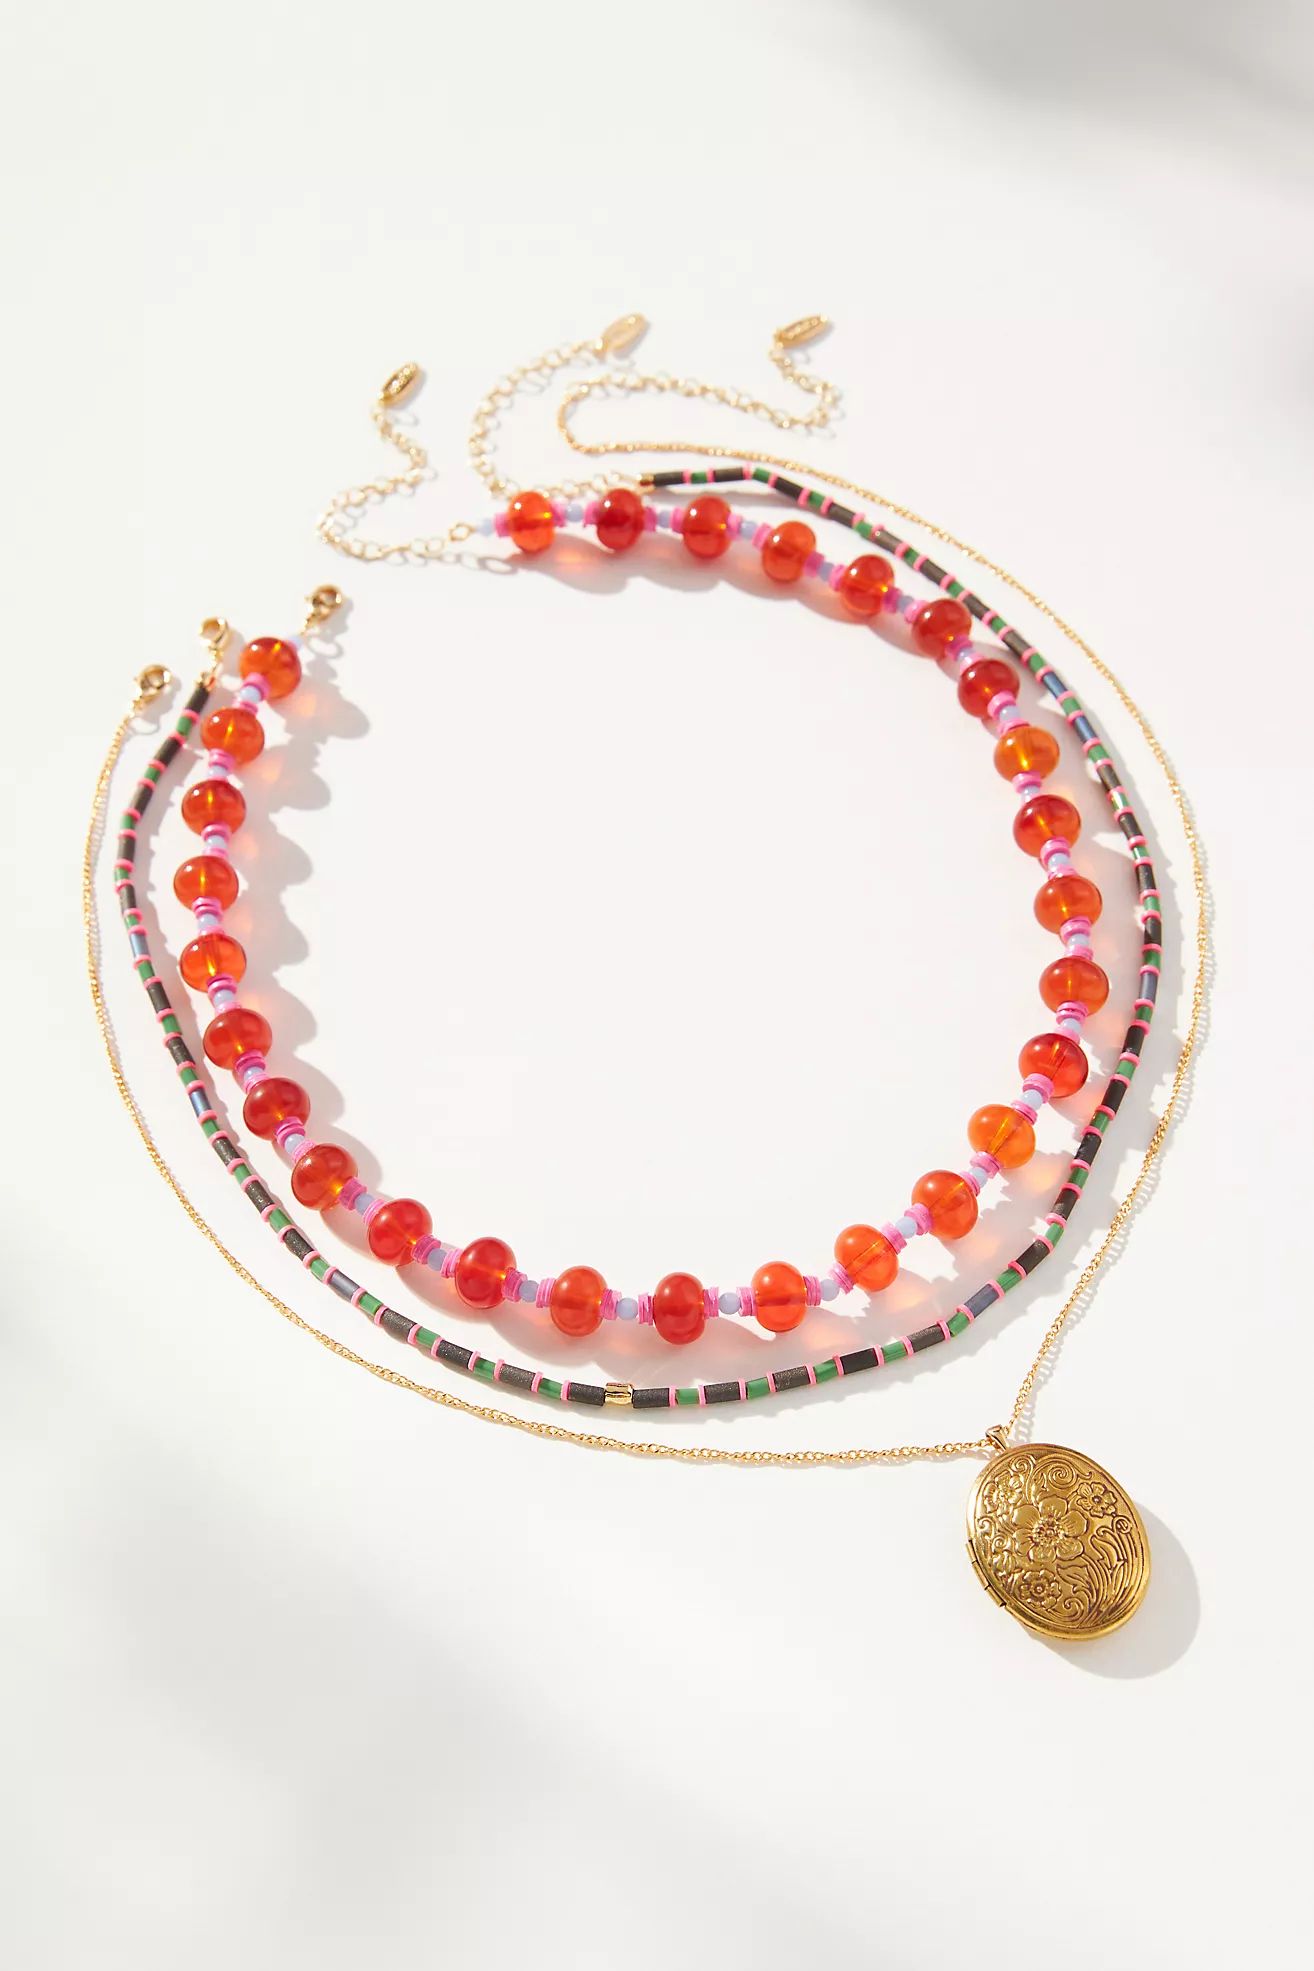 Camp Icon Beaded Necklaces, Set of 3 | Anthropologie (US)